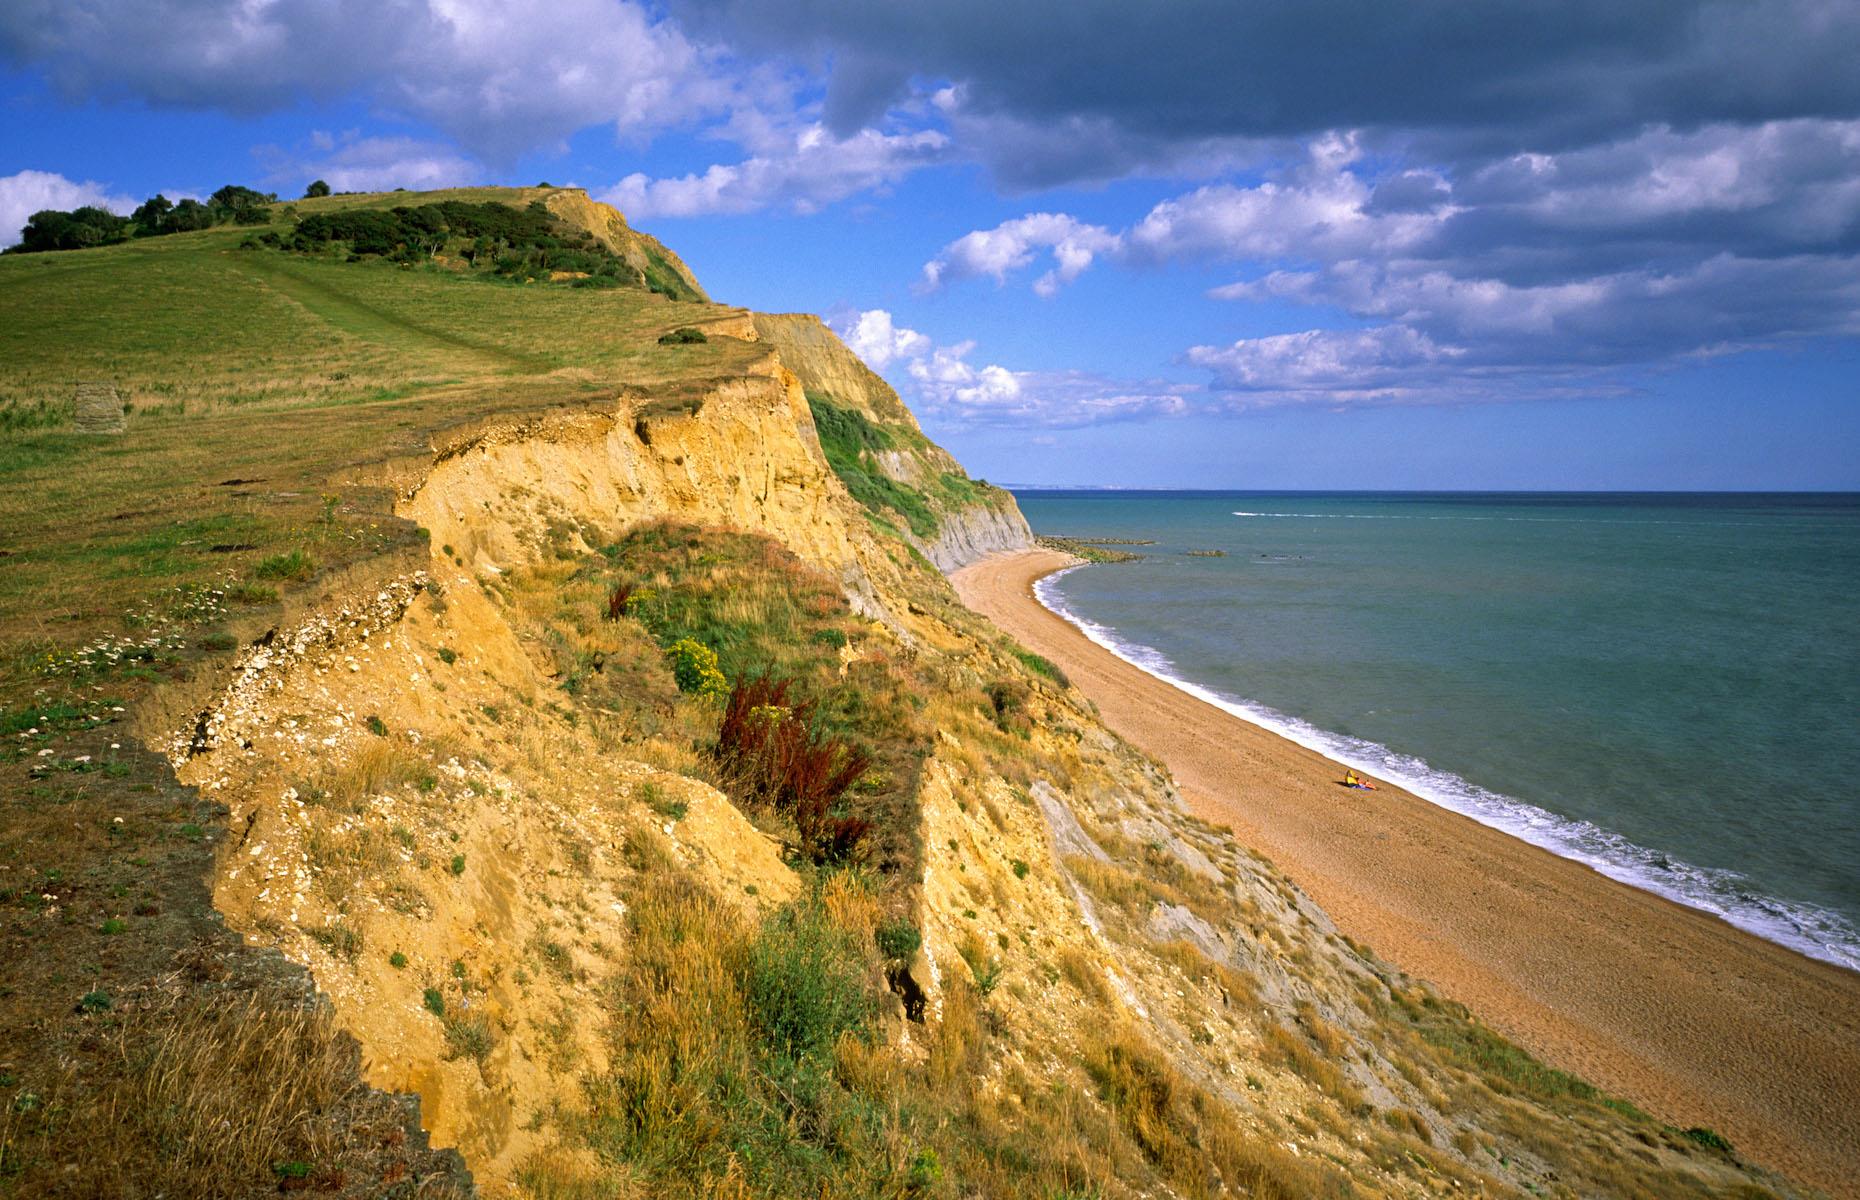 <p>In 2021, the biggest rockfall in 60 years took place between Seatown (pictured) and Eype Beach. Signs urge walkers to stay away from the edge of the crumbling coastline and beach-goers to avoid sitting near the base of cliffs. The falls are unpredictable but storms, heavy rainfall and rough seas all increase risk. Unfortunately, directly after a storm is also peak time for fossil collectors to pick through the area's famous sediments, as storms can expose new fossils along the shoreline. Tombstoning off Dorset's famous rock arch Durdle Door has also resulted in tragedy, as has people attempting to climb parts of the cliffs.</p>